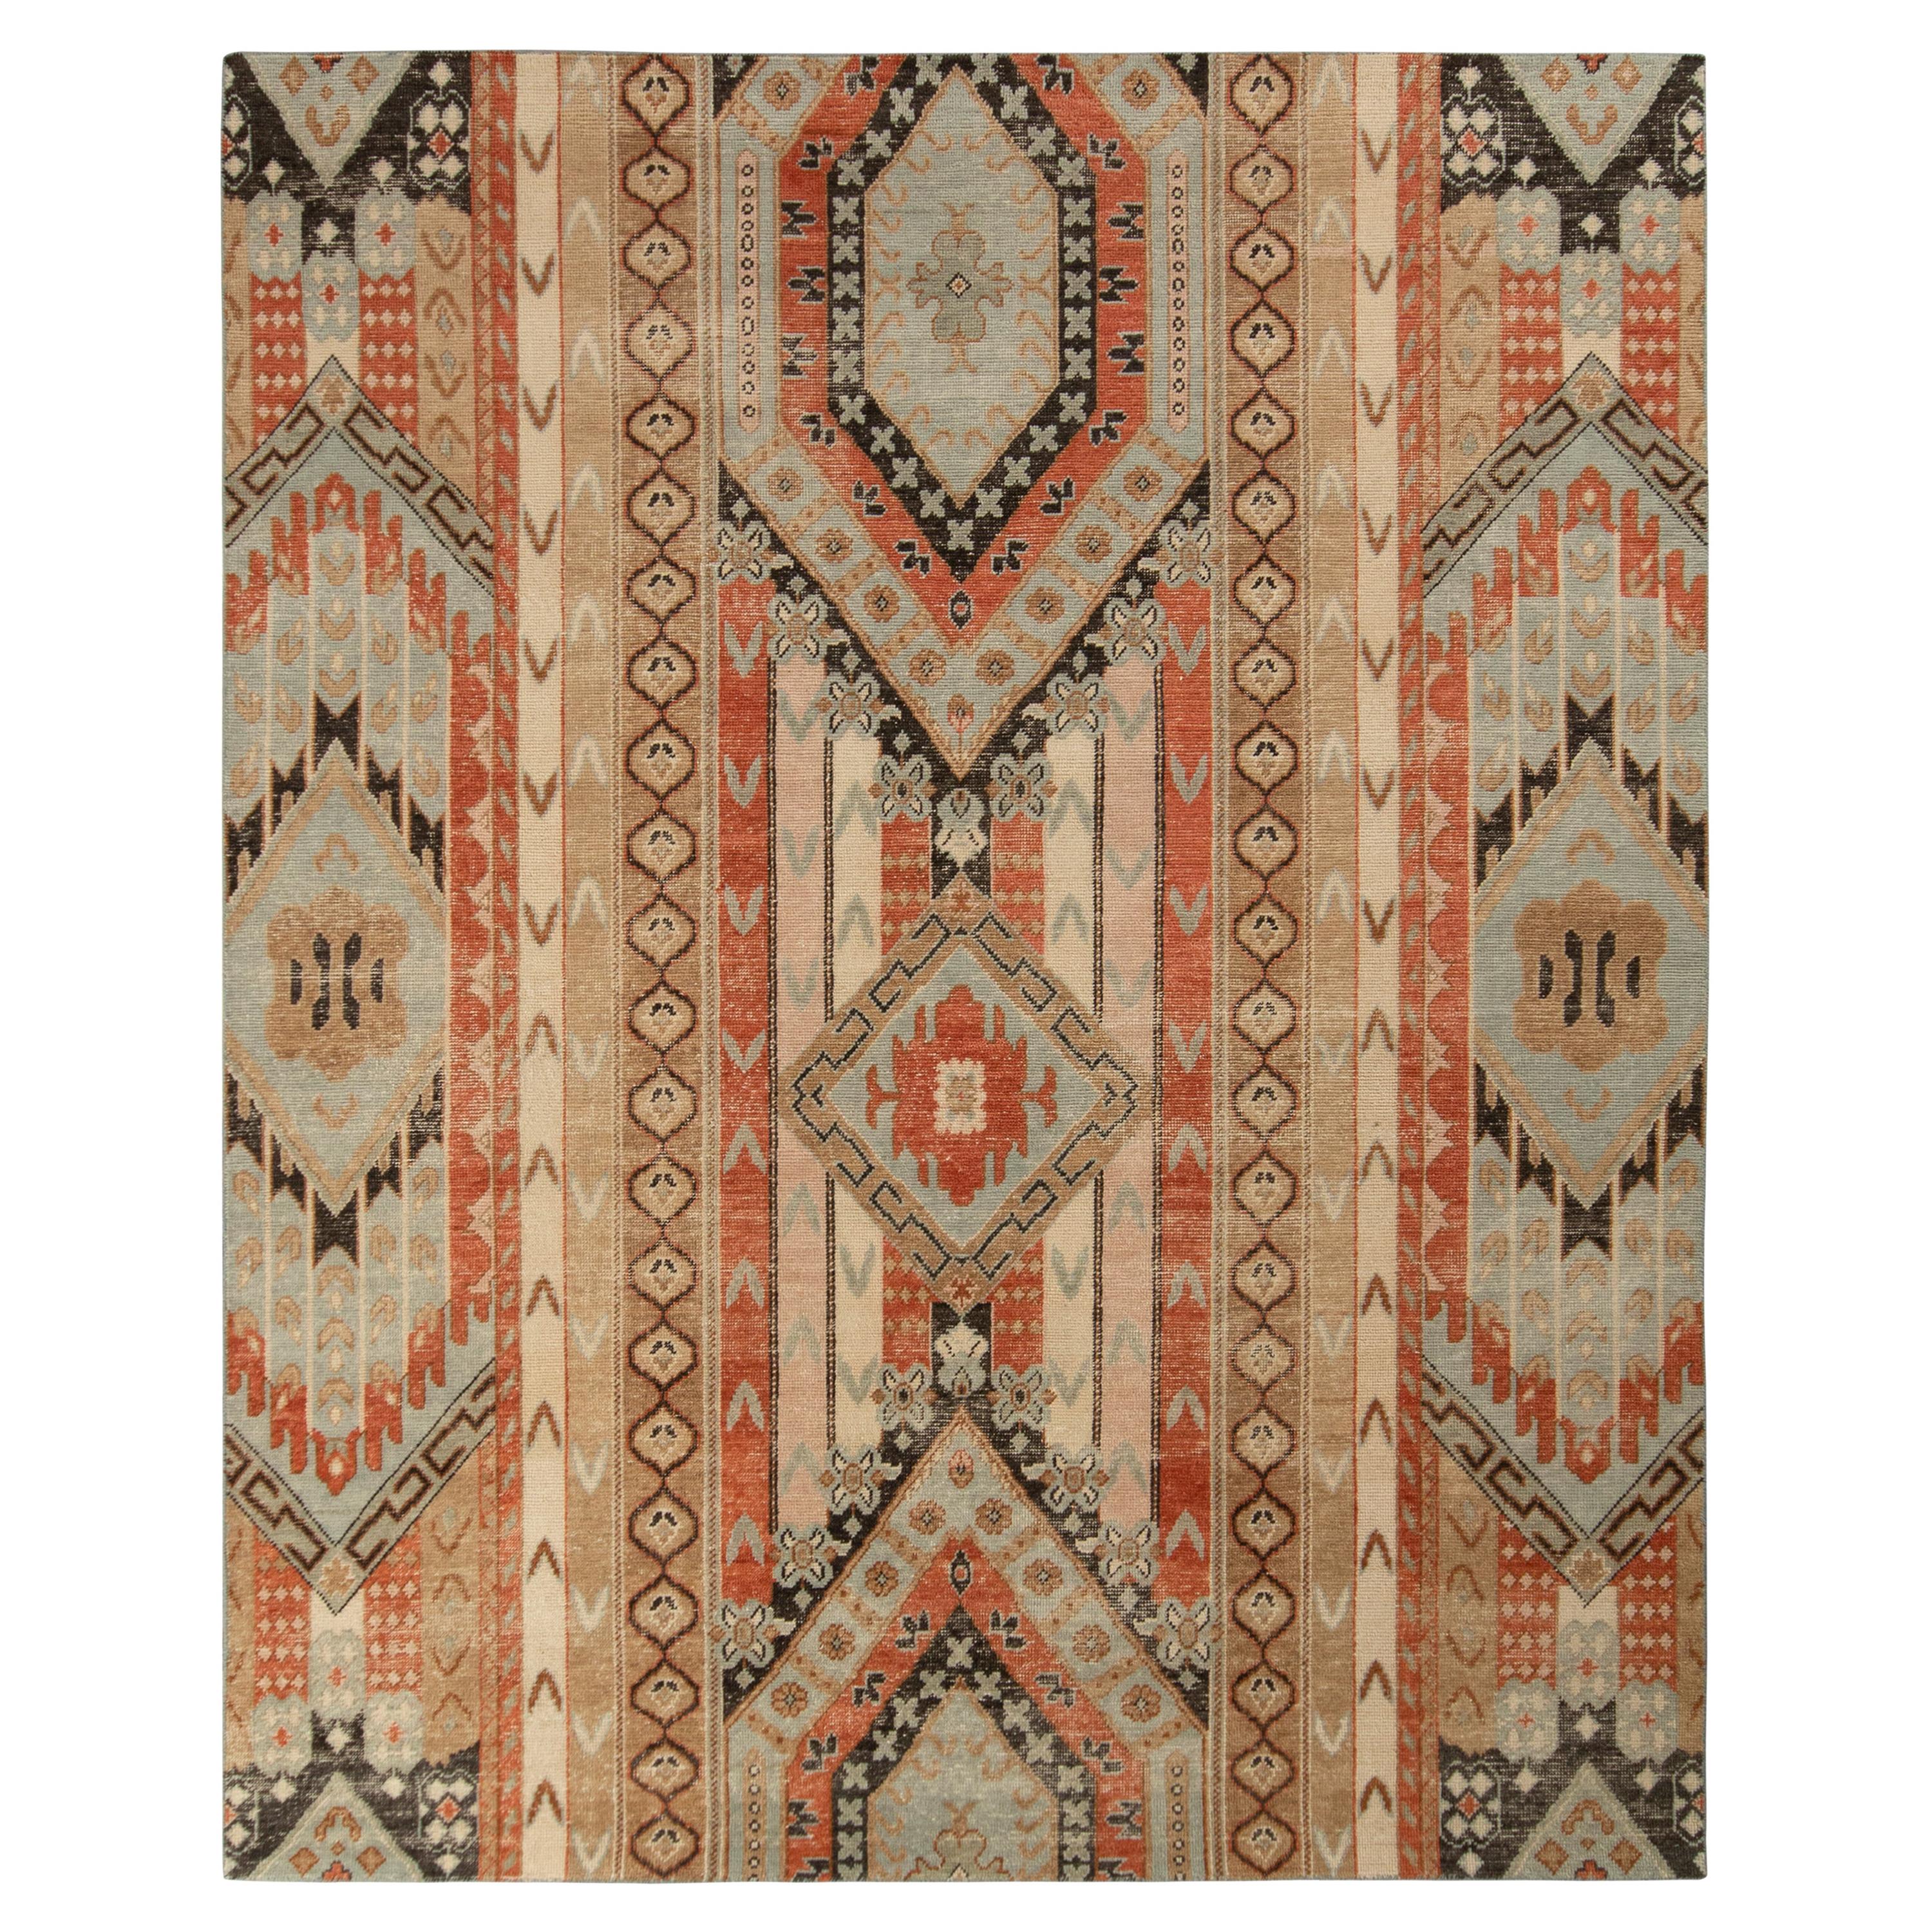 Rug & Kilim’s Distressed Style Rug in Red and Blue All Over Geometric Patterns